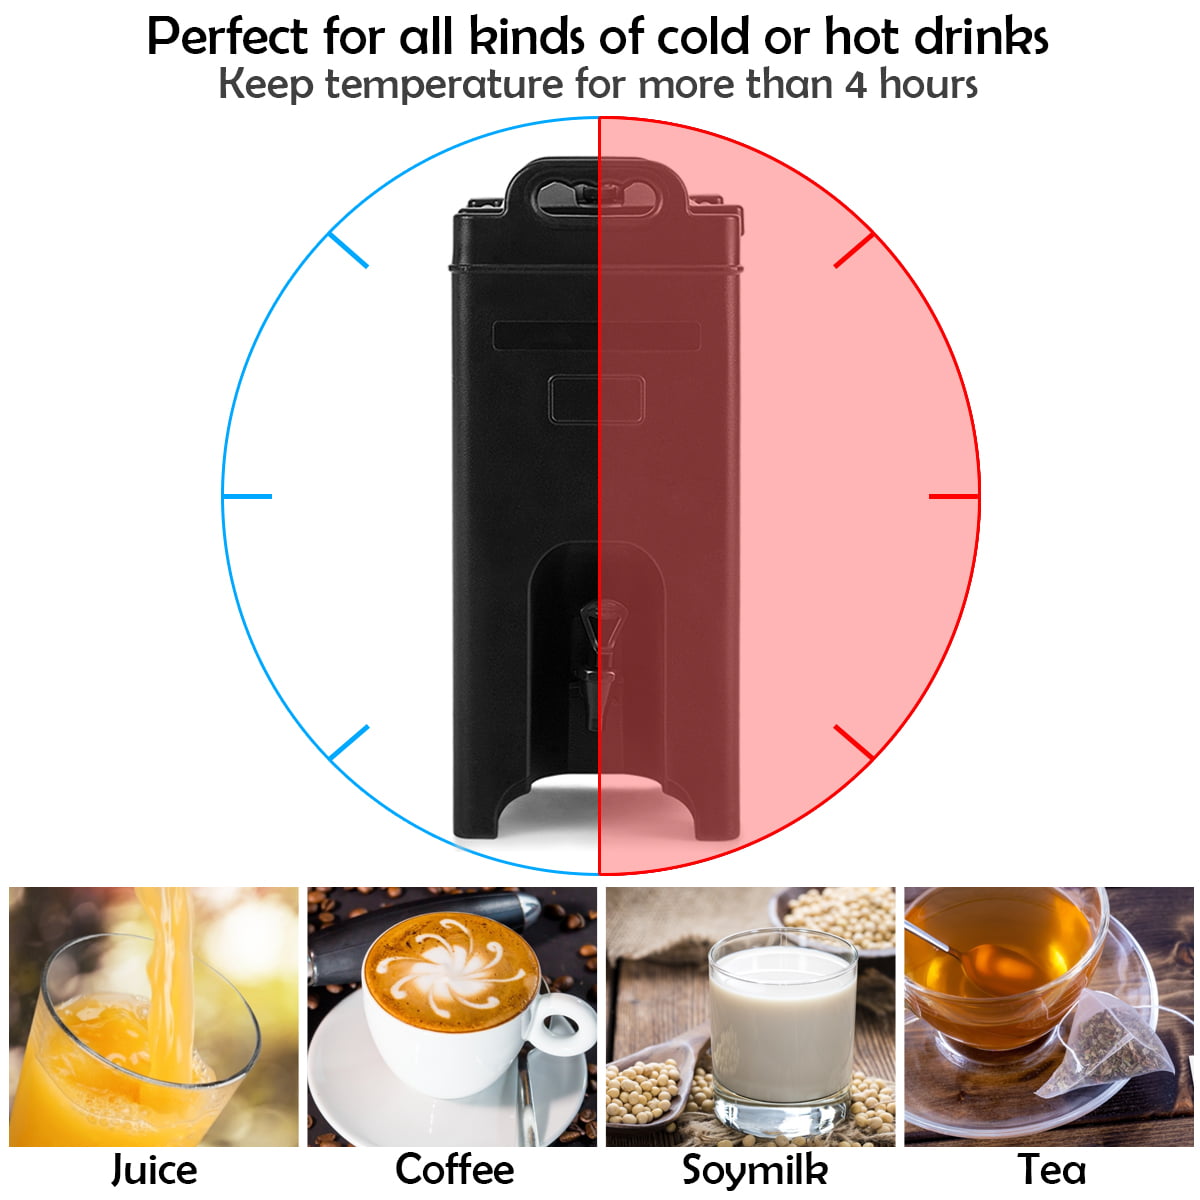 5 Gallon Insulated Beverage Dispenser Tea Coffee Hot Cold Catering Restaurant 